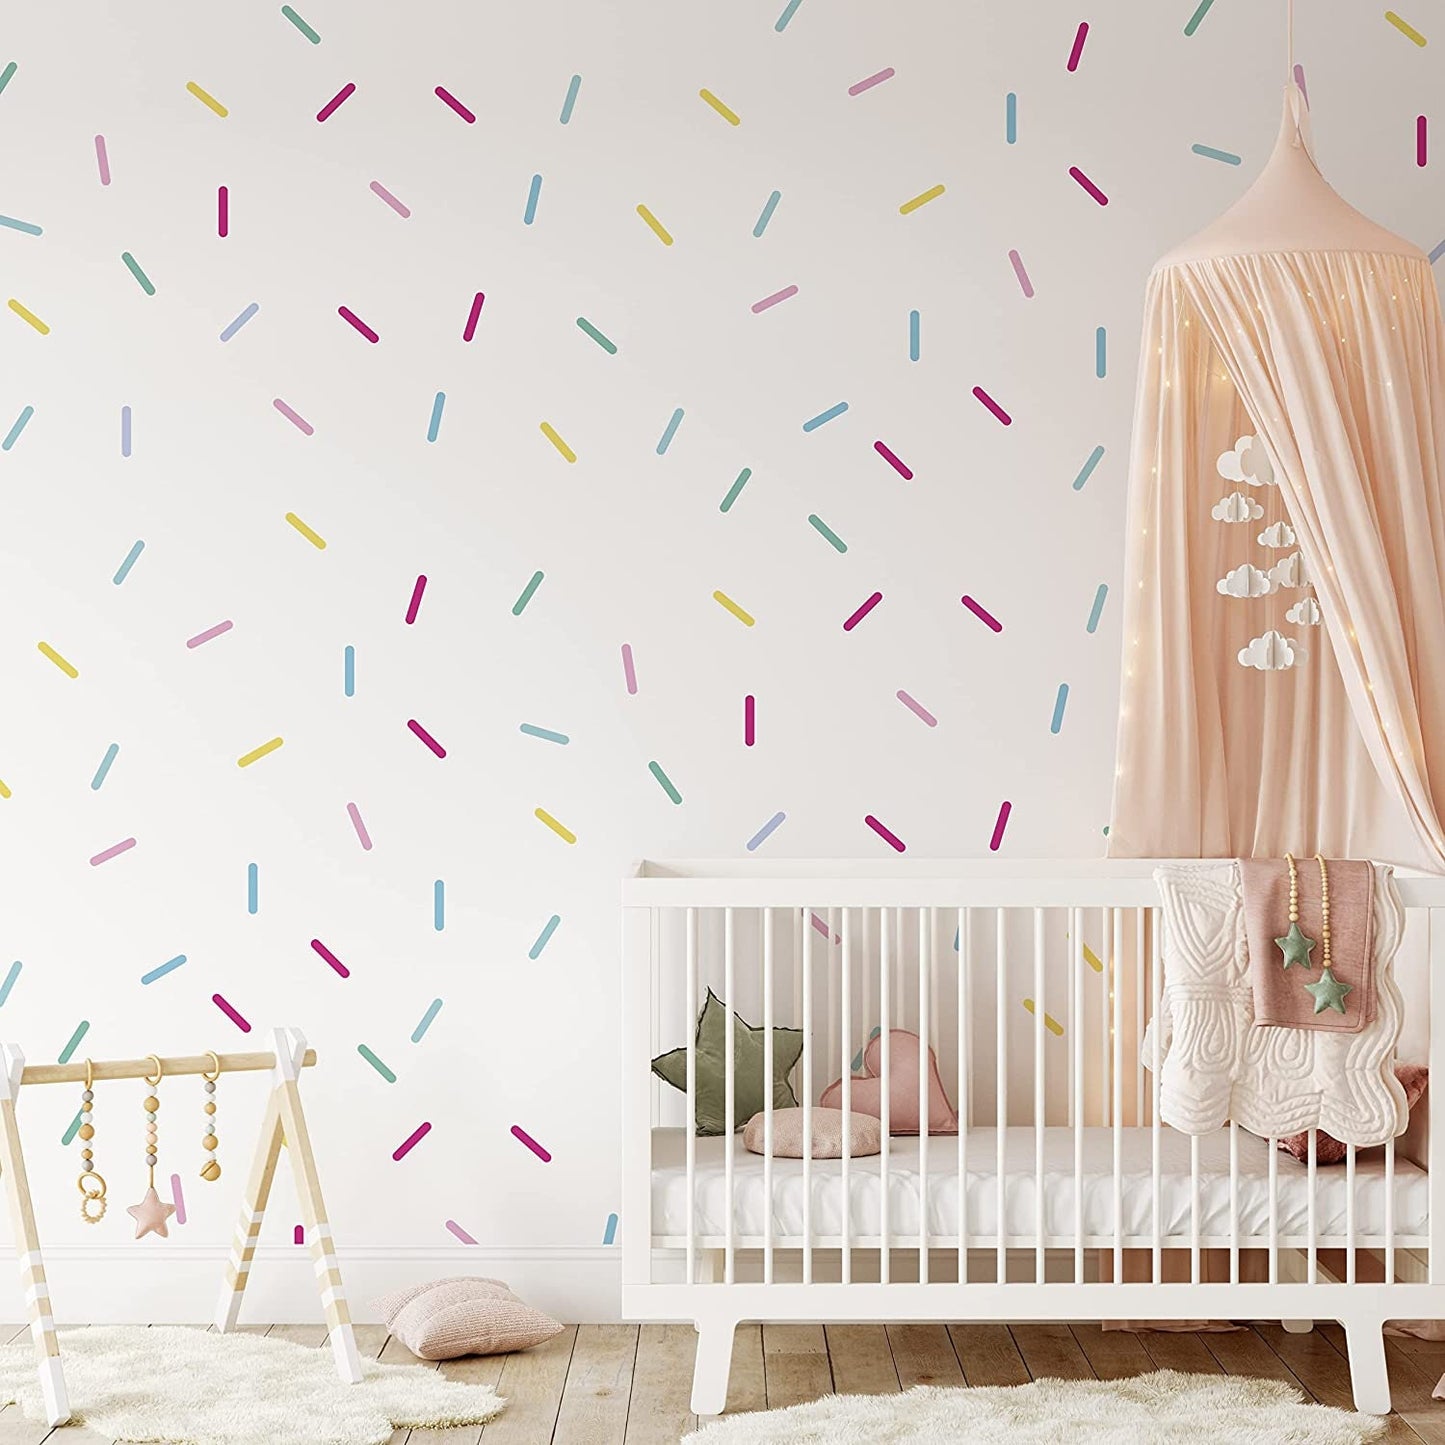 Colourful Sprinkle Confetti Wall Stickers For Home Nursery Kids Bedroom Pastel Decals Removable Pink Yellow Blue Purple